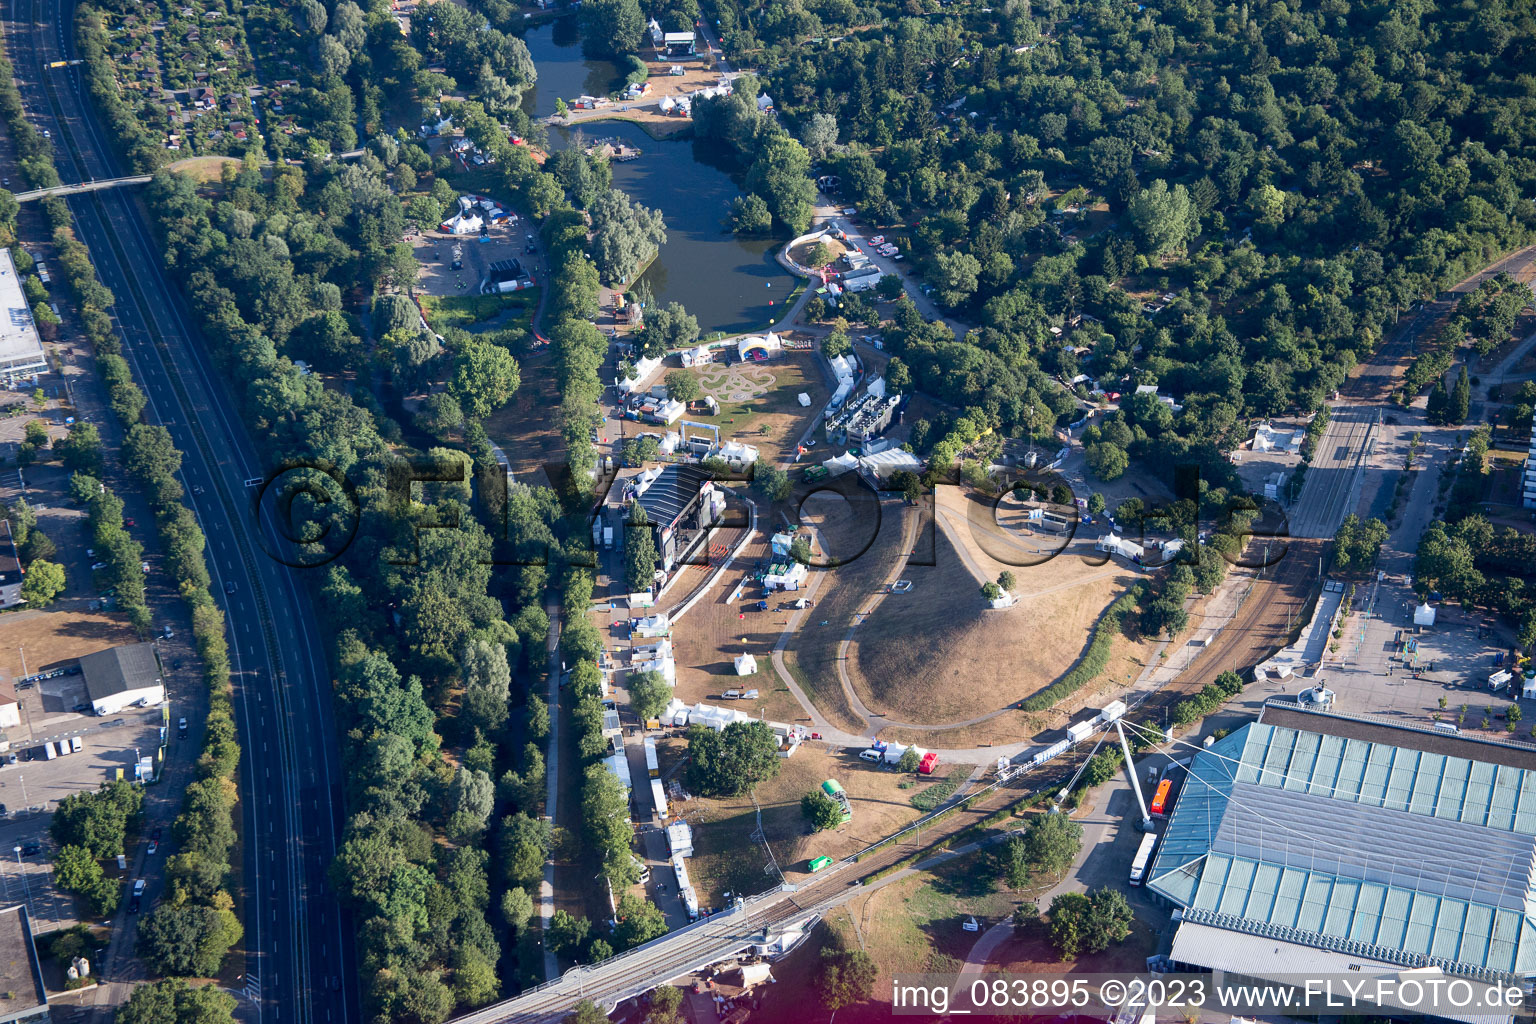 Aerial view of The festival in the Günther Klotz facility in the district Südweststadt in Karlsruhe in the state Baden-Wuerttemberg, Germany